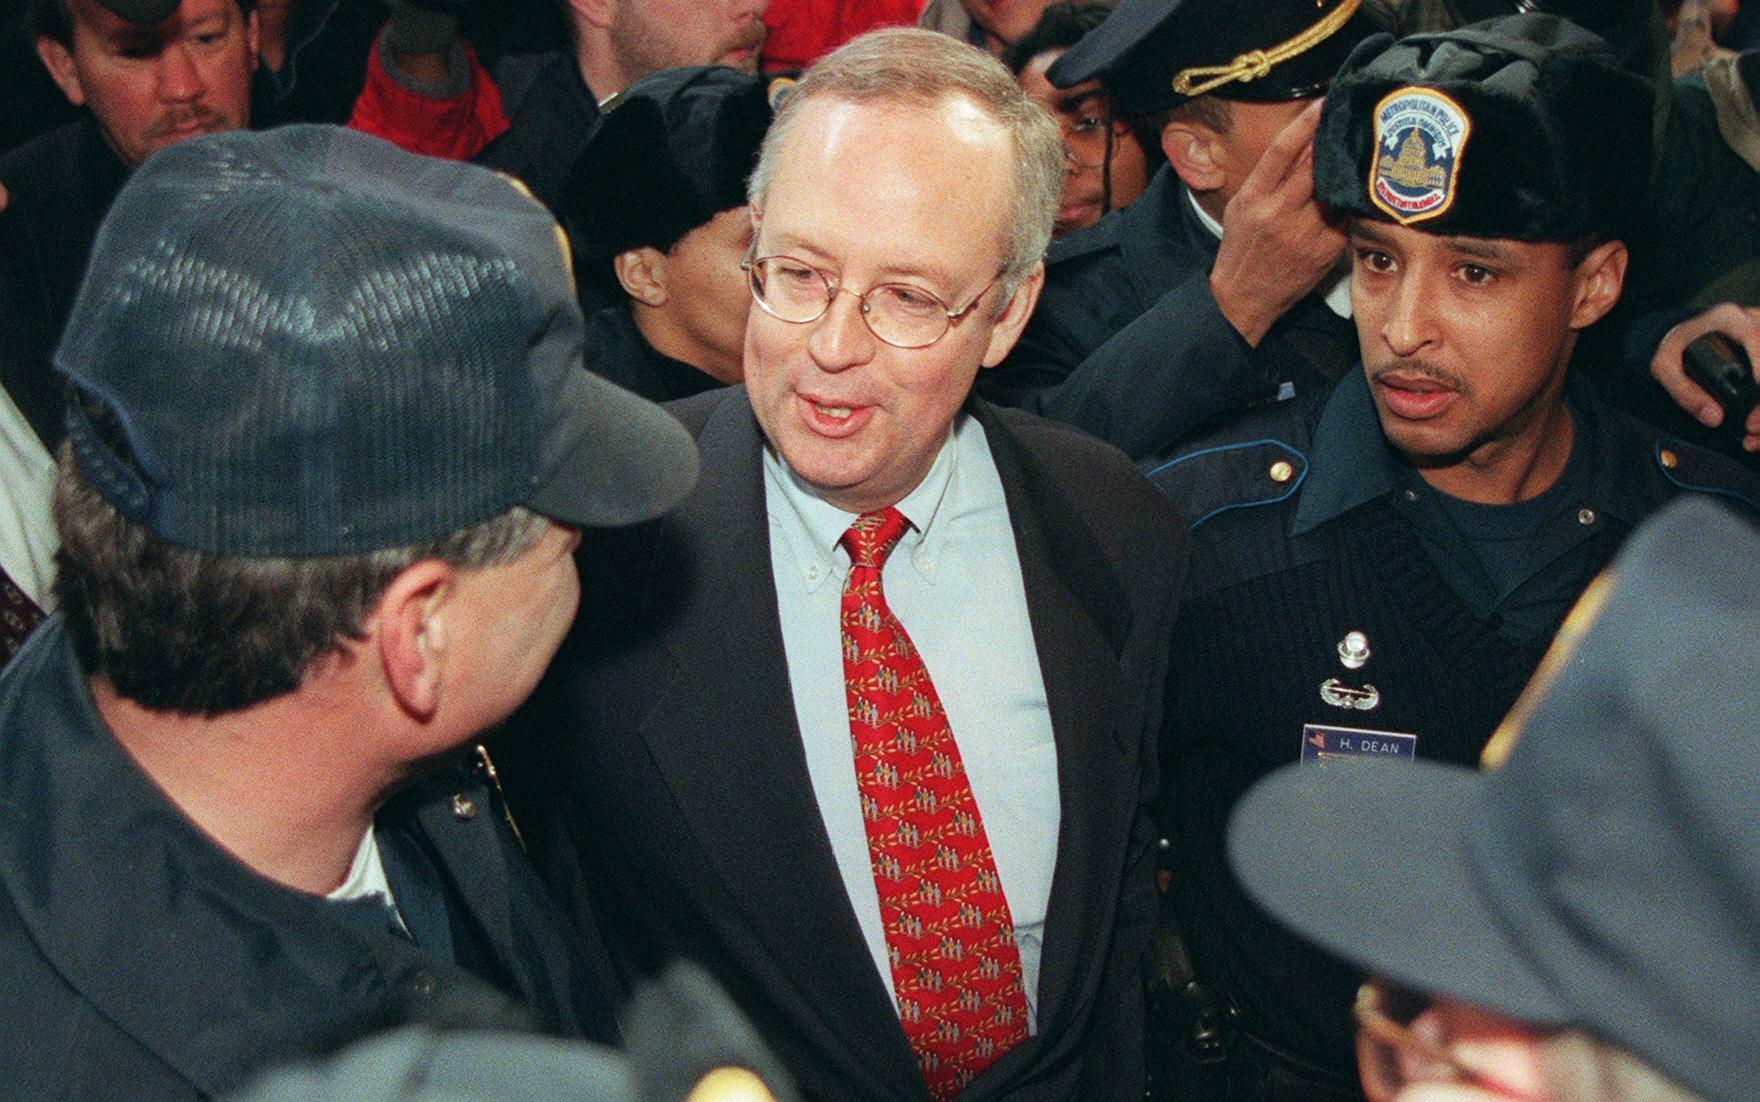 Kenneth Starr, independent counsel, speaks to a Washington, DC police officer as he is escorted away after speaking at a press conference on 22 January 1998